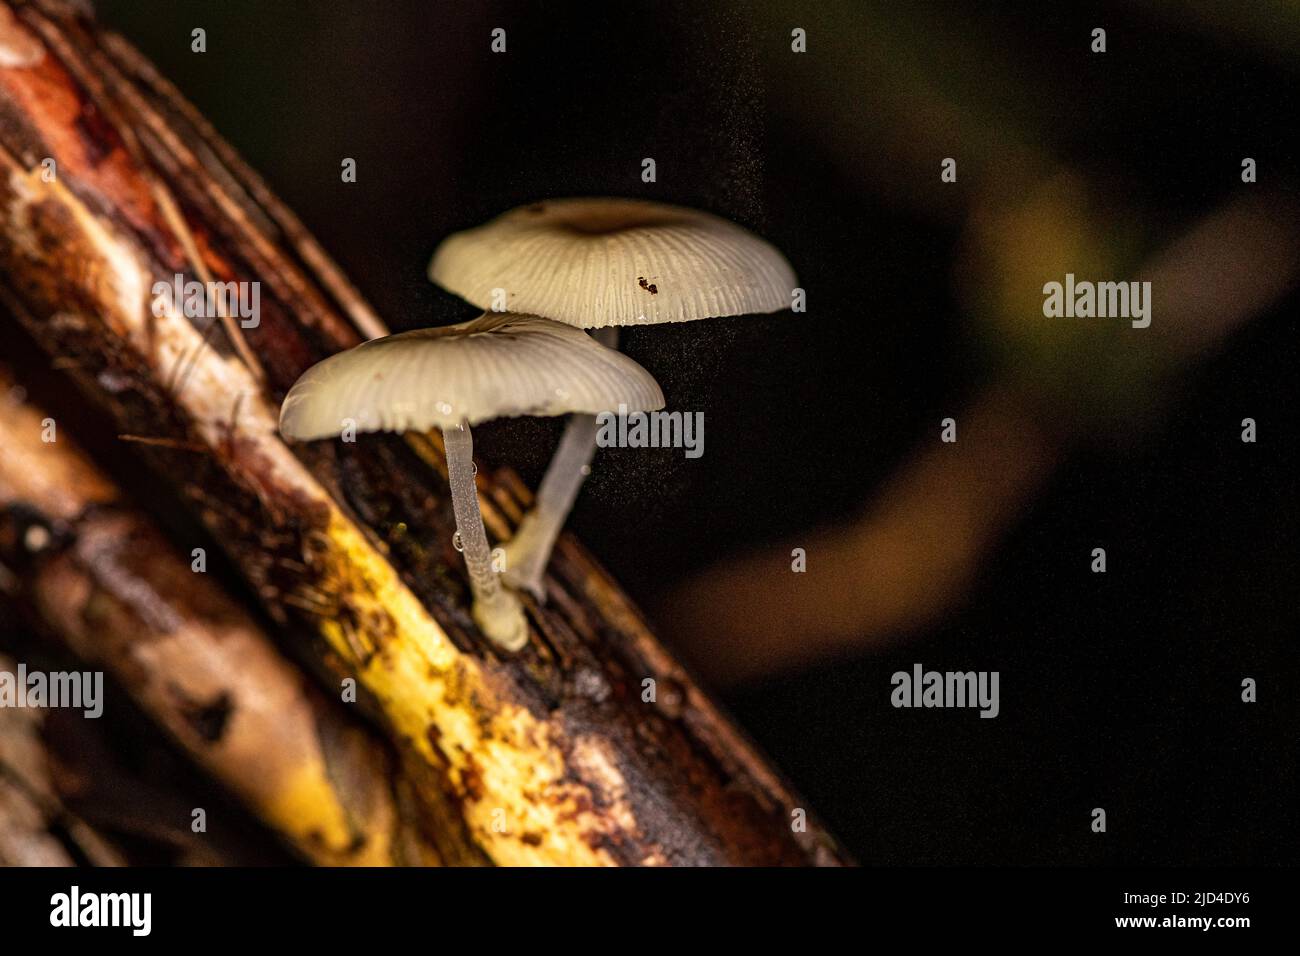 Fungi from the genus Mycena (probably M. chlorophos) has the potential of shining bioluminescent light. Photo from Tanjung Puting National Park, Kalim Stock Photo